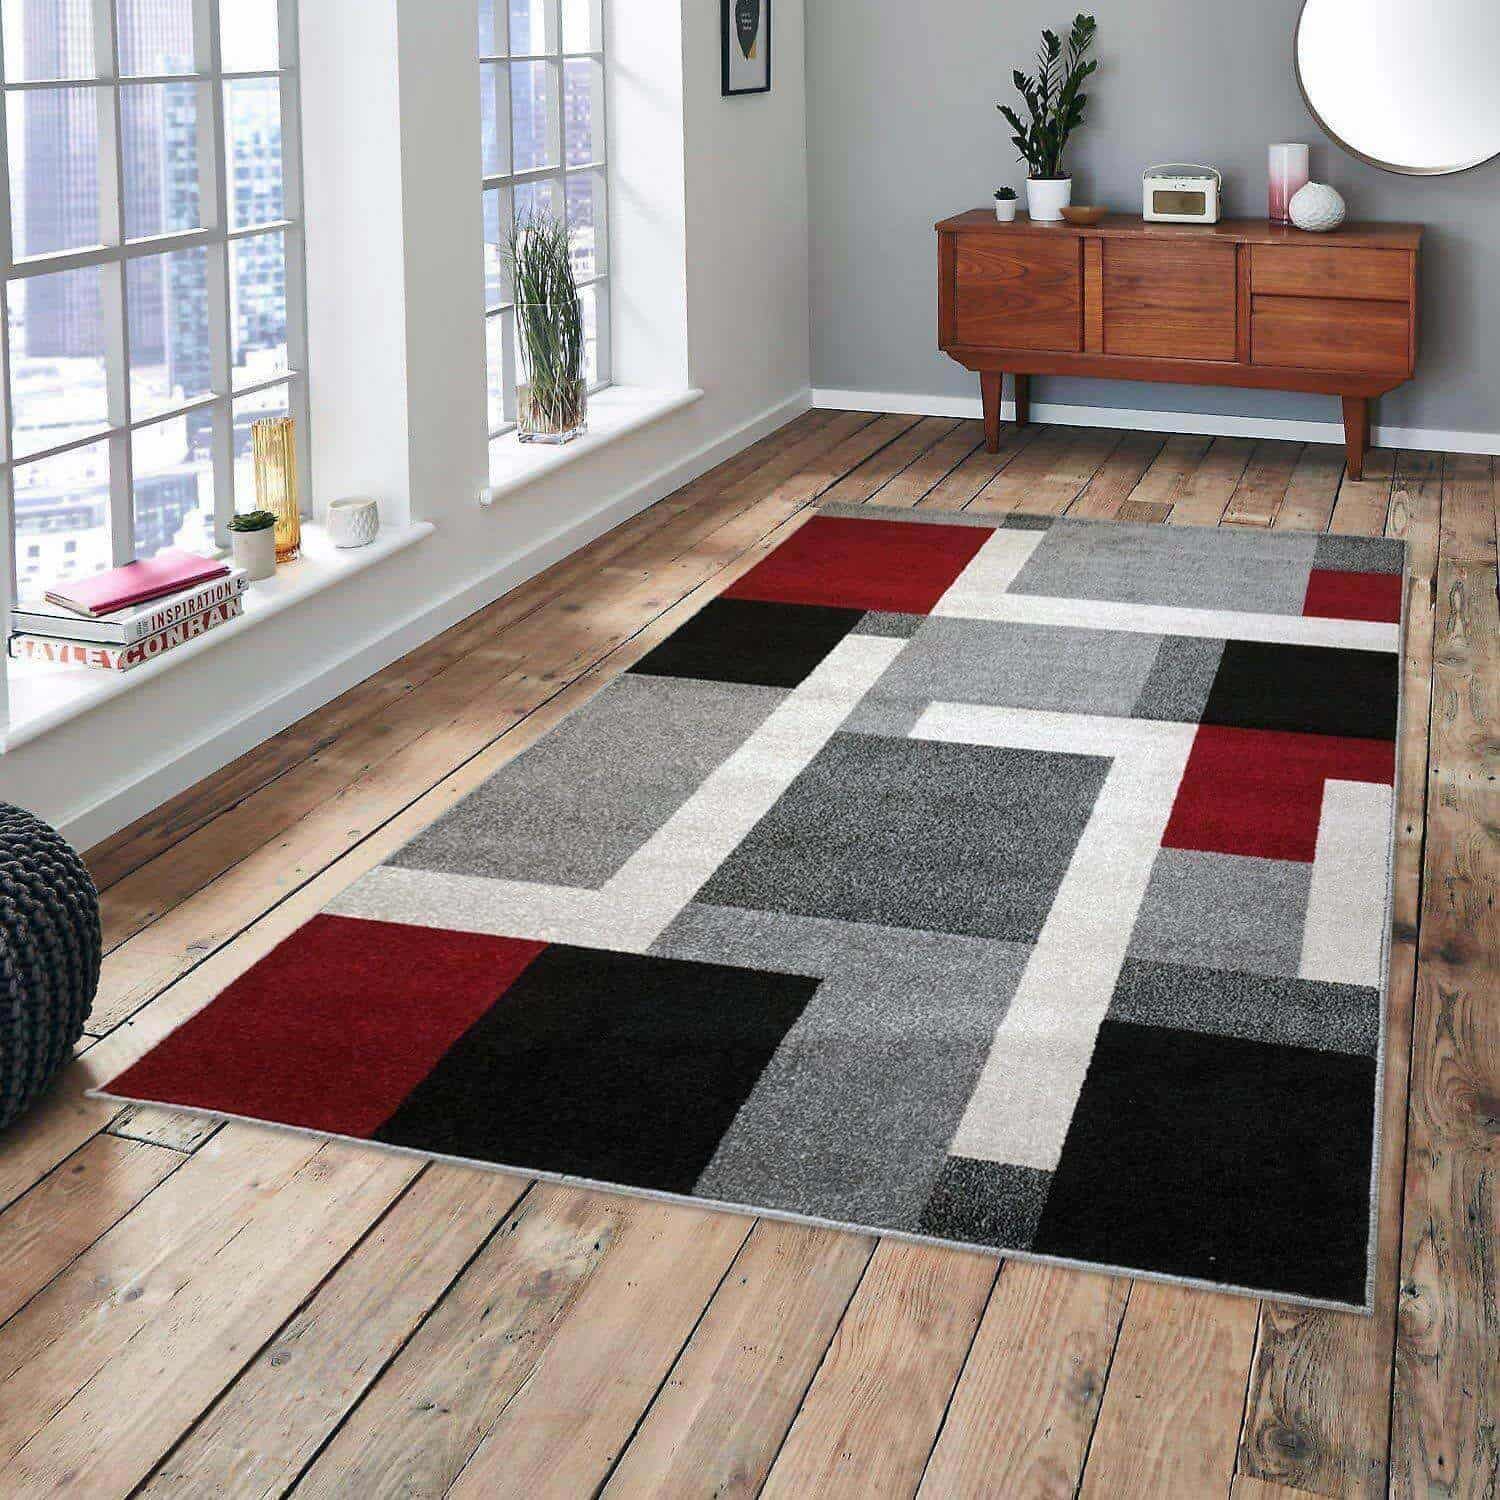 Most Beautiful Carpet and Rug Designs for Your Bedroom